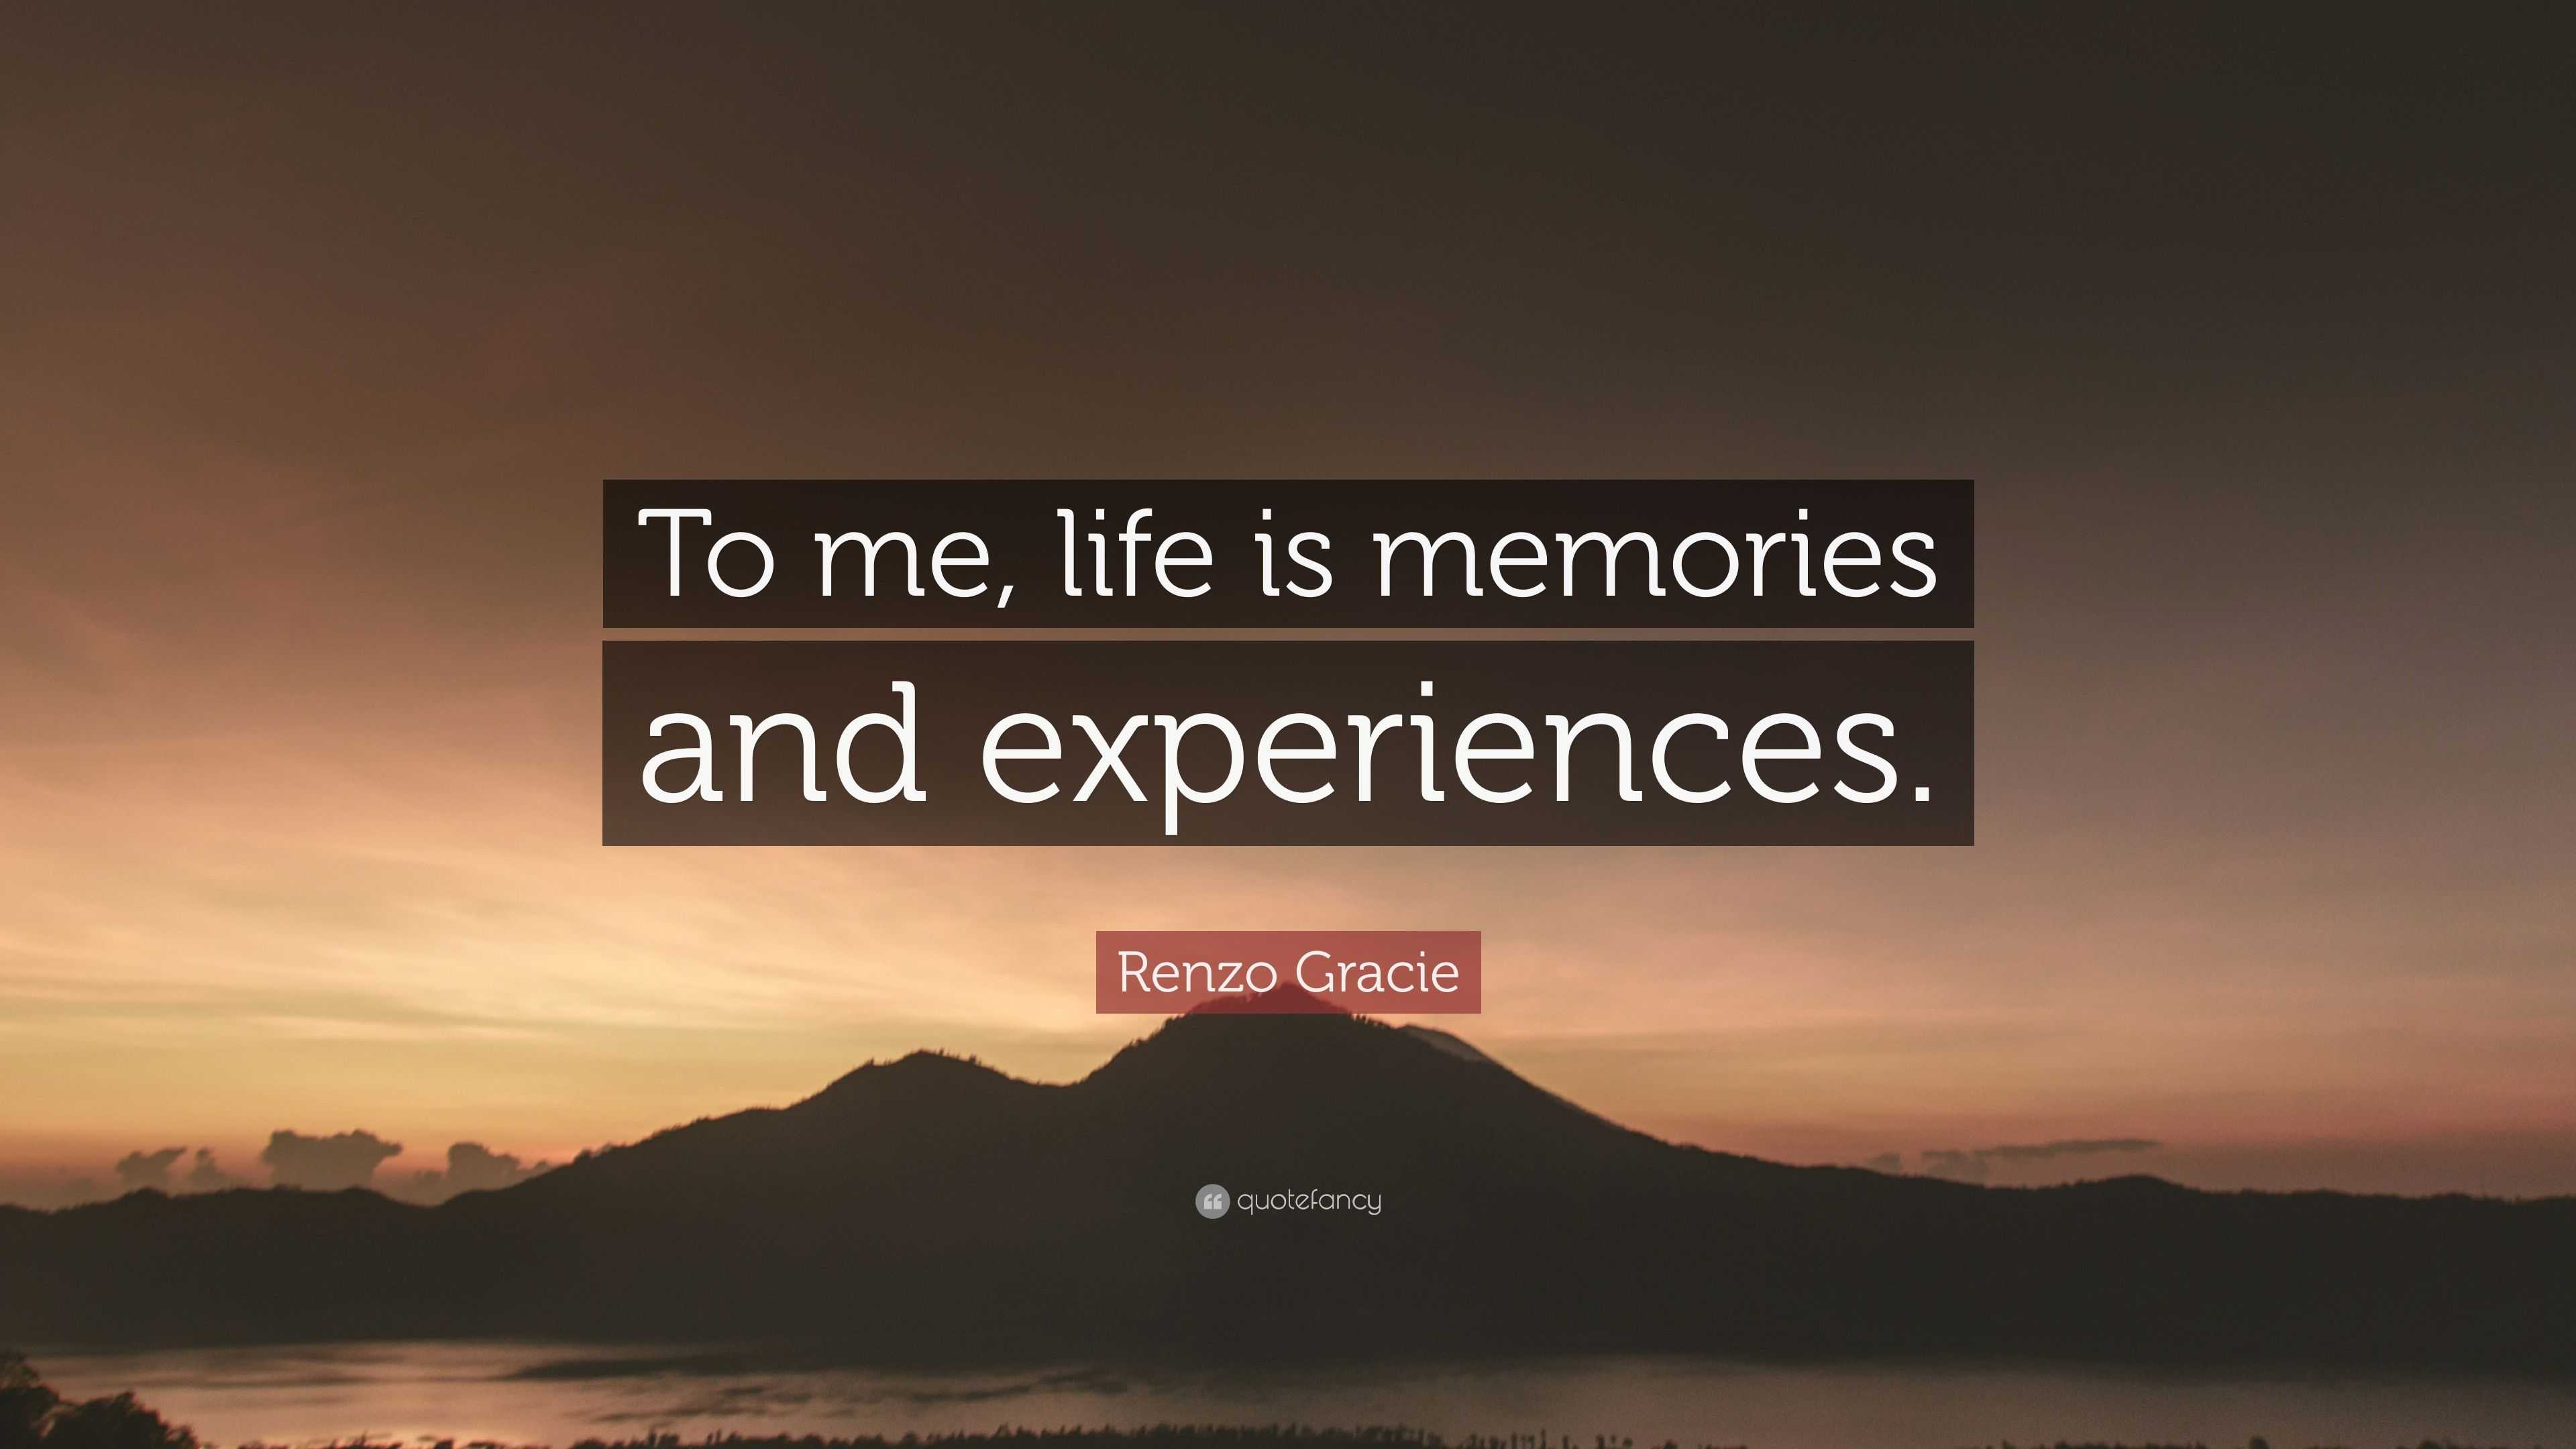 Renzo Gracie Quote: “To me, life is memories and experiences.”